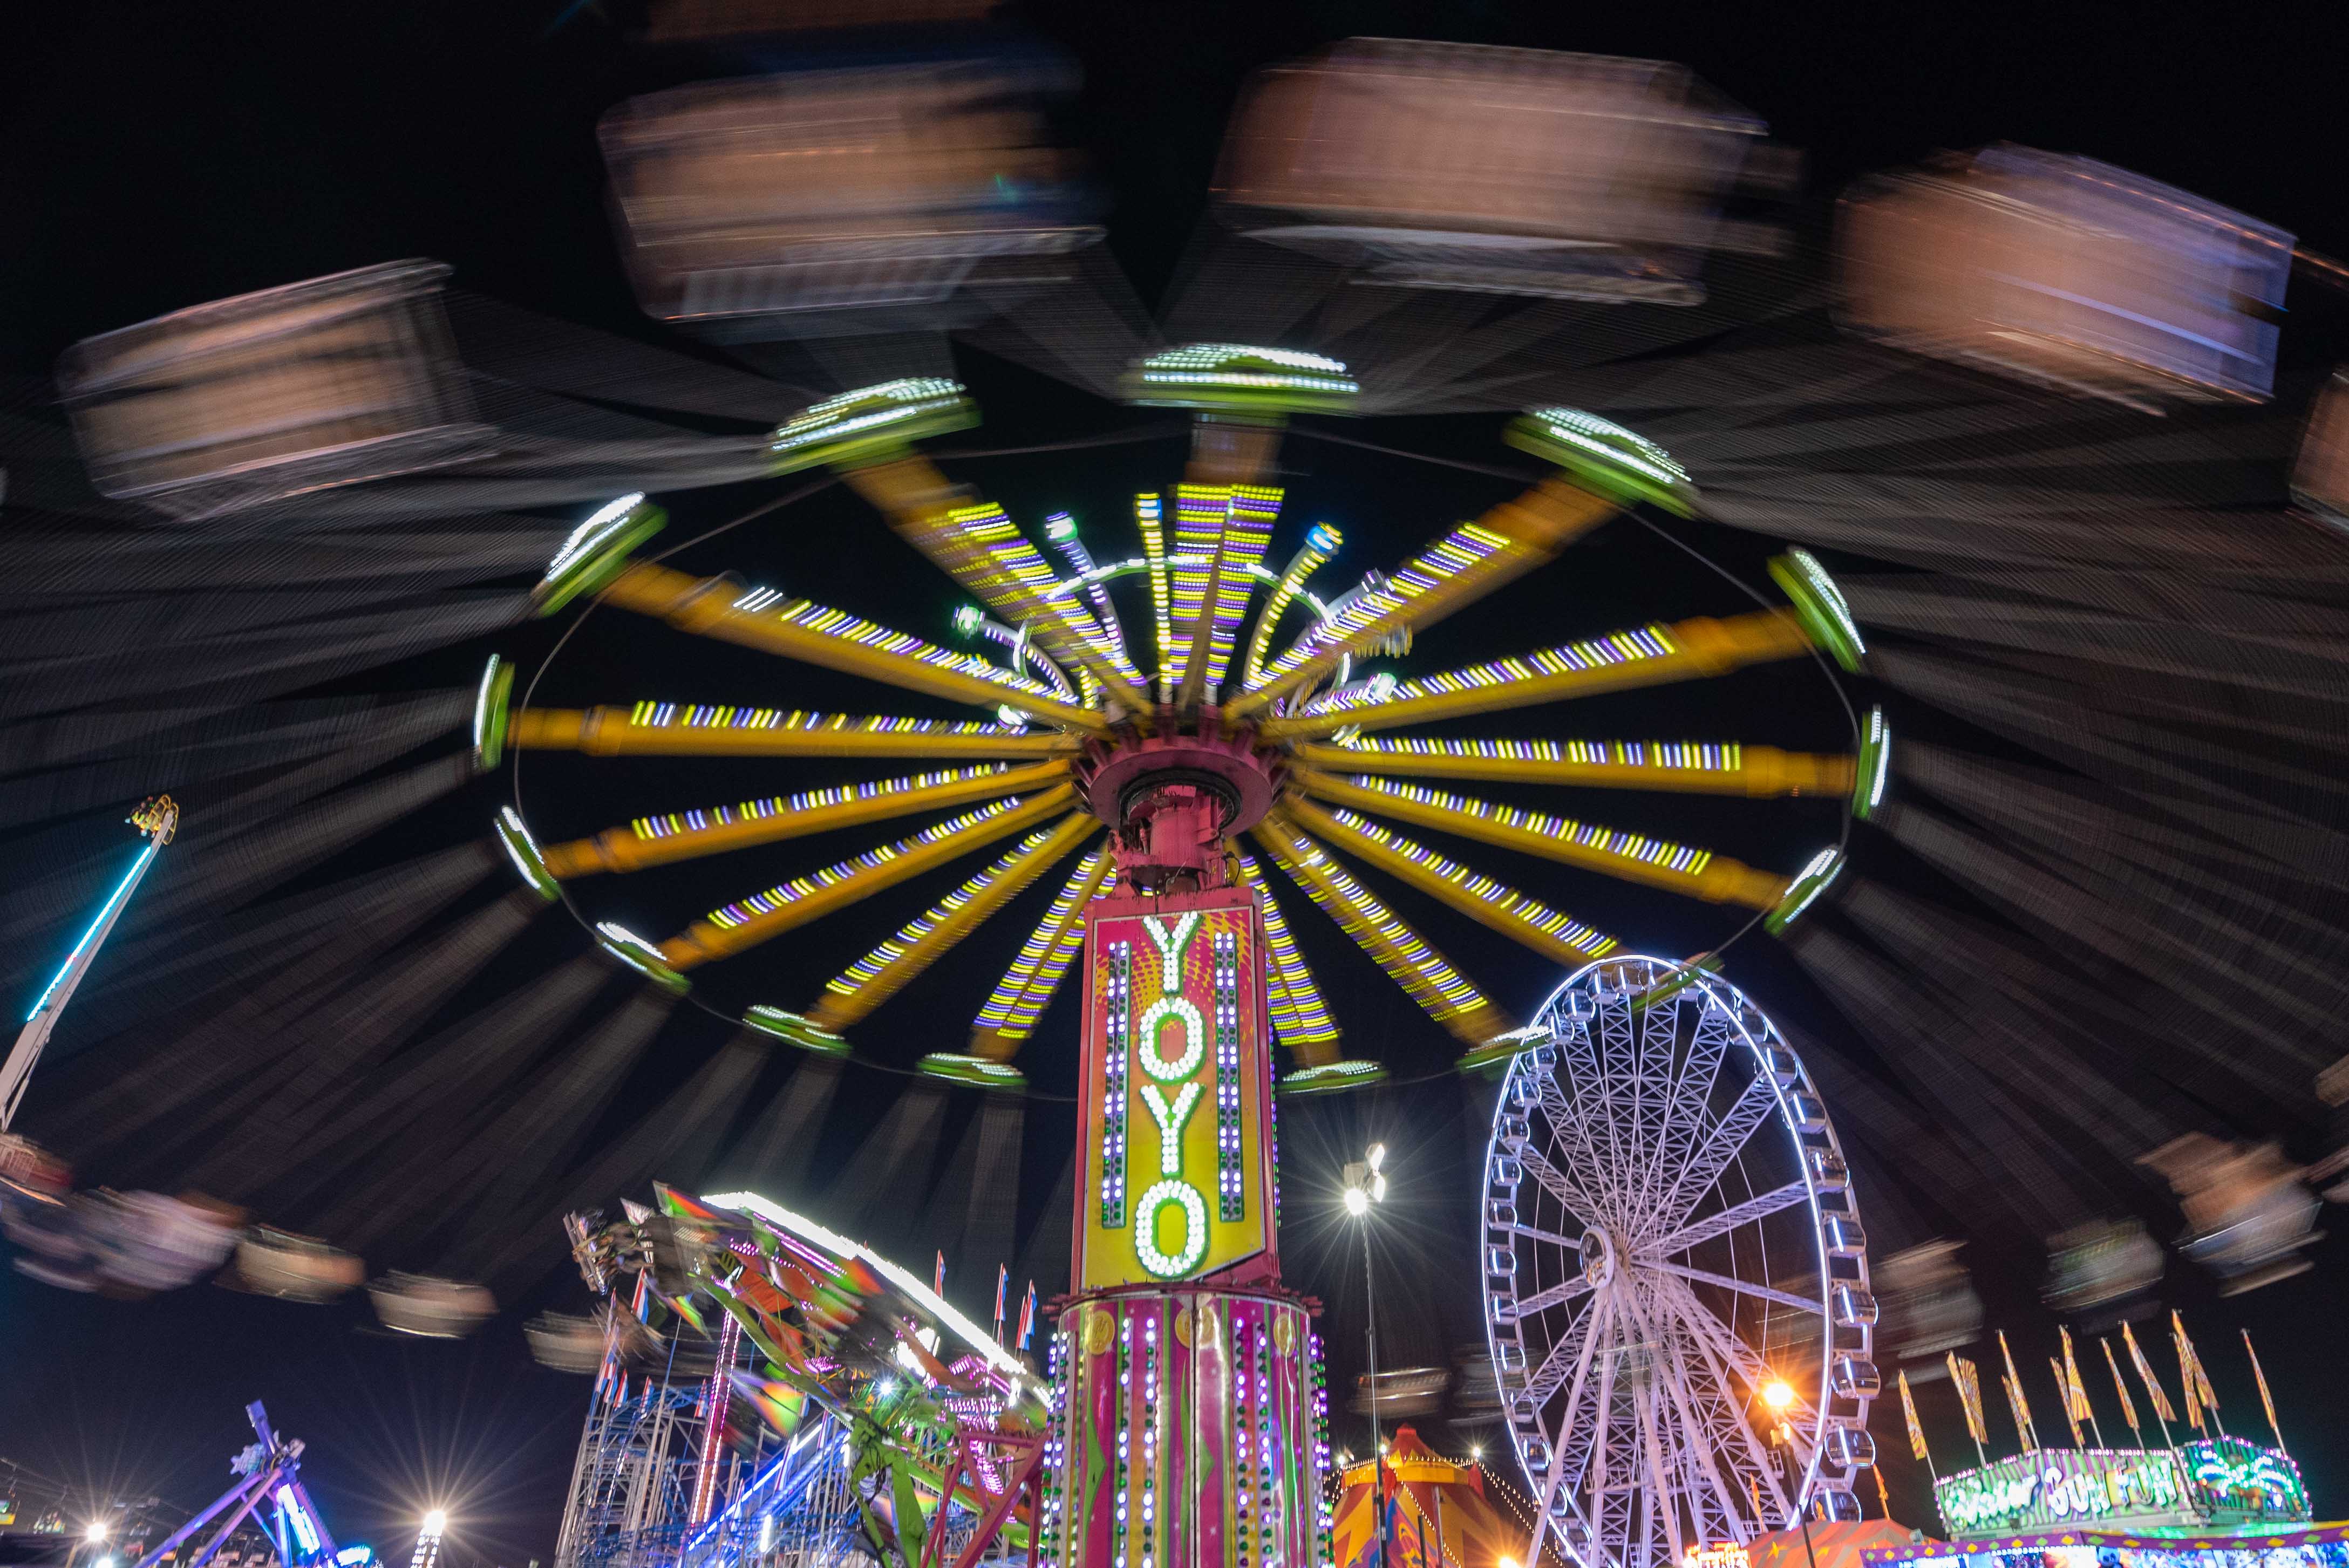 Lights, Camera, Action at the SC State Fair by Kelly Easler